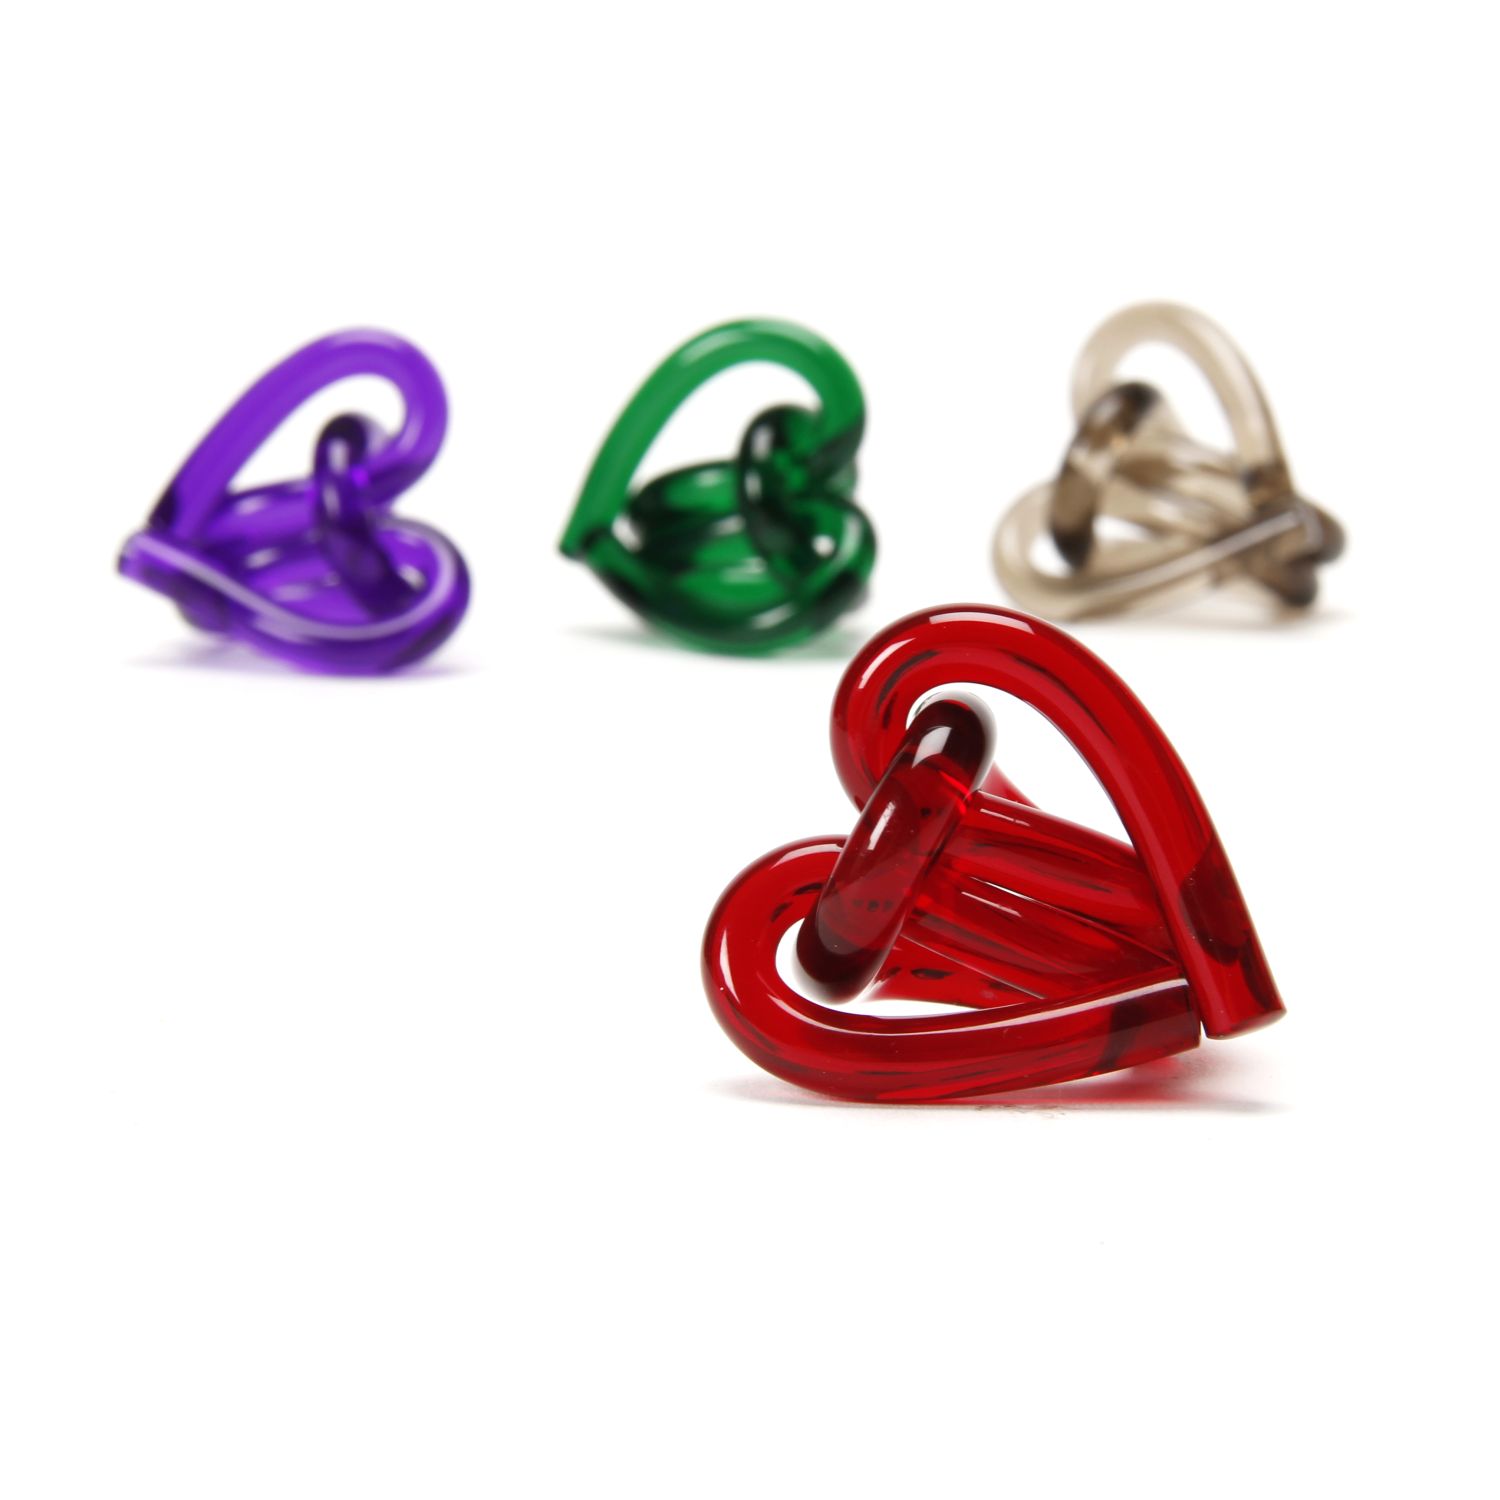 Corey Moranis: Heart Ring Green Product Image 2 of 3